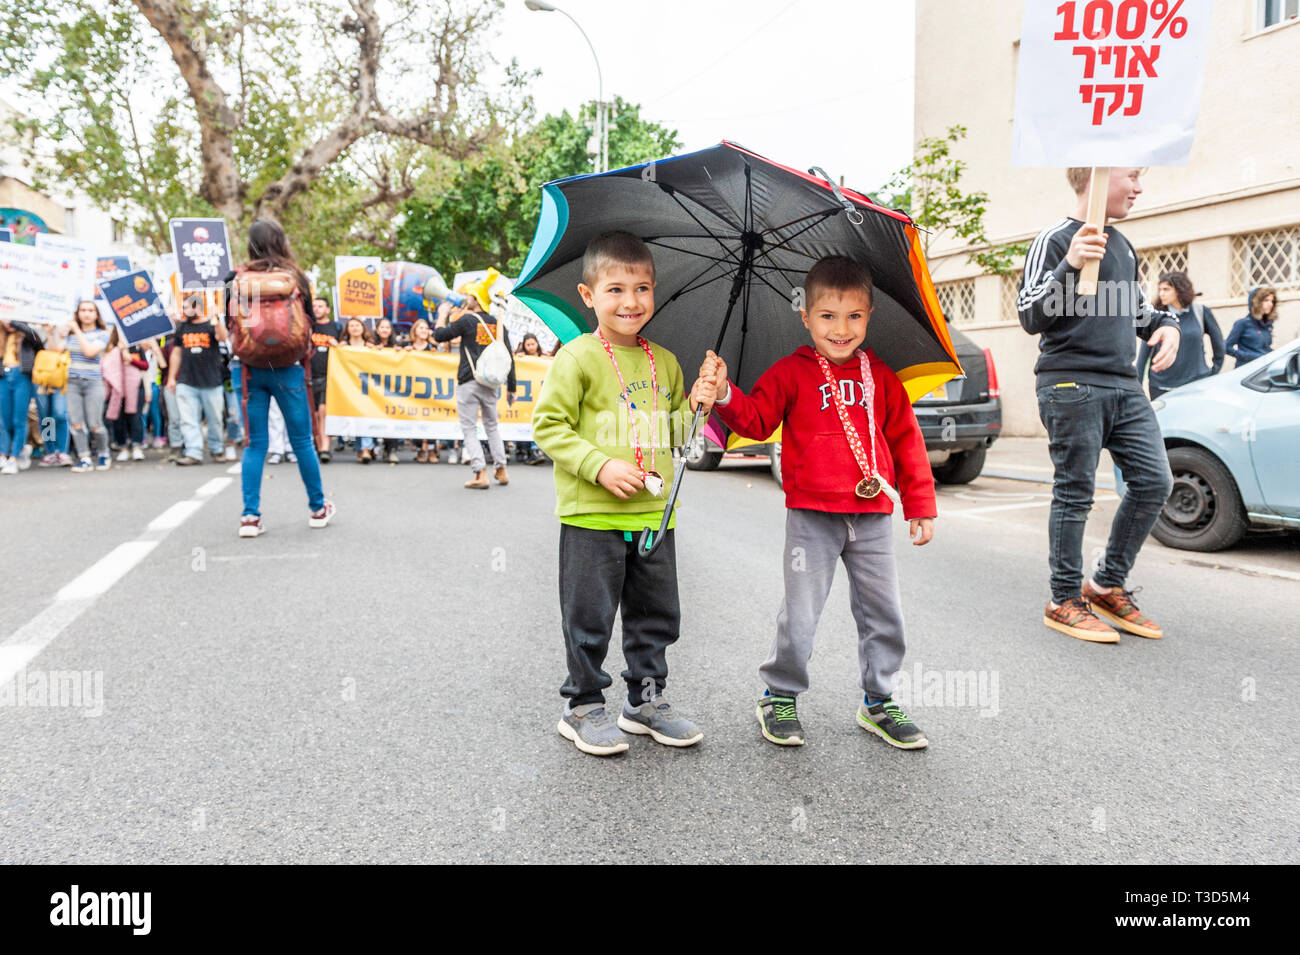 Israel, Tel Aviv - 29 March 2019: Demonstration for the climate on King George street Stock Photo